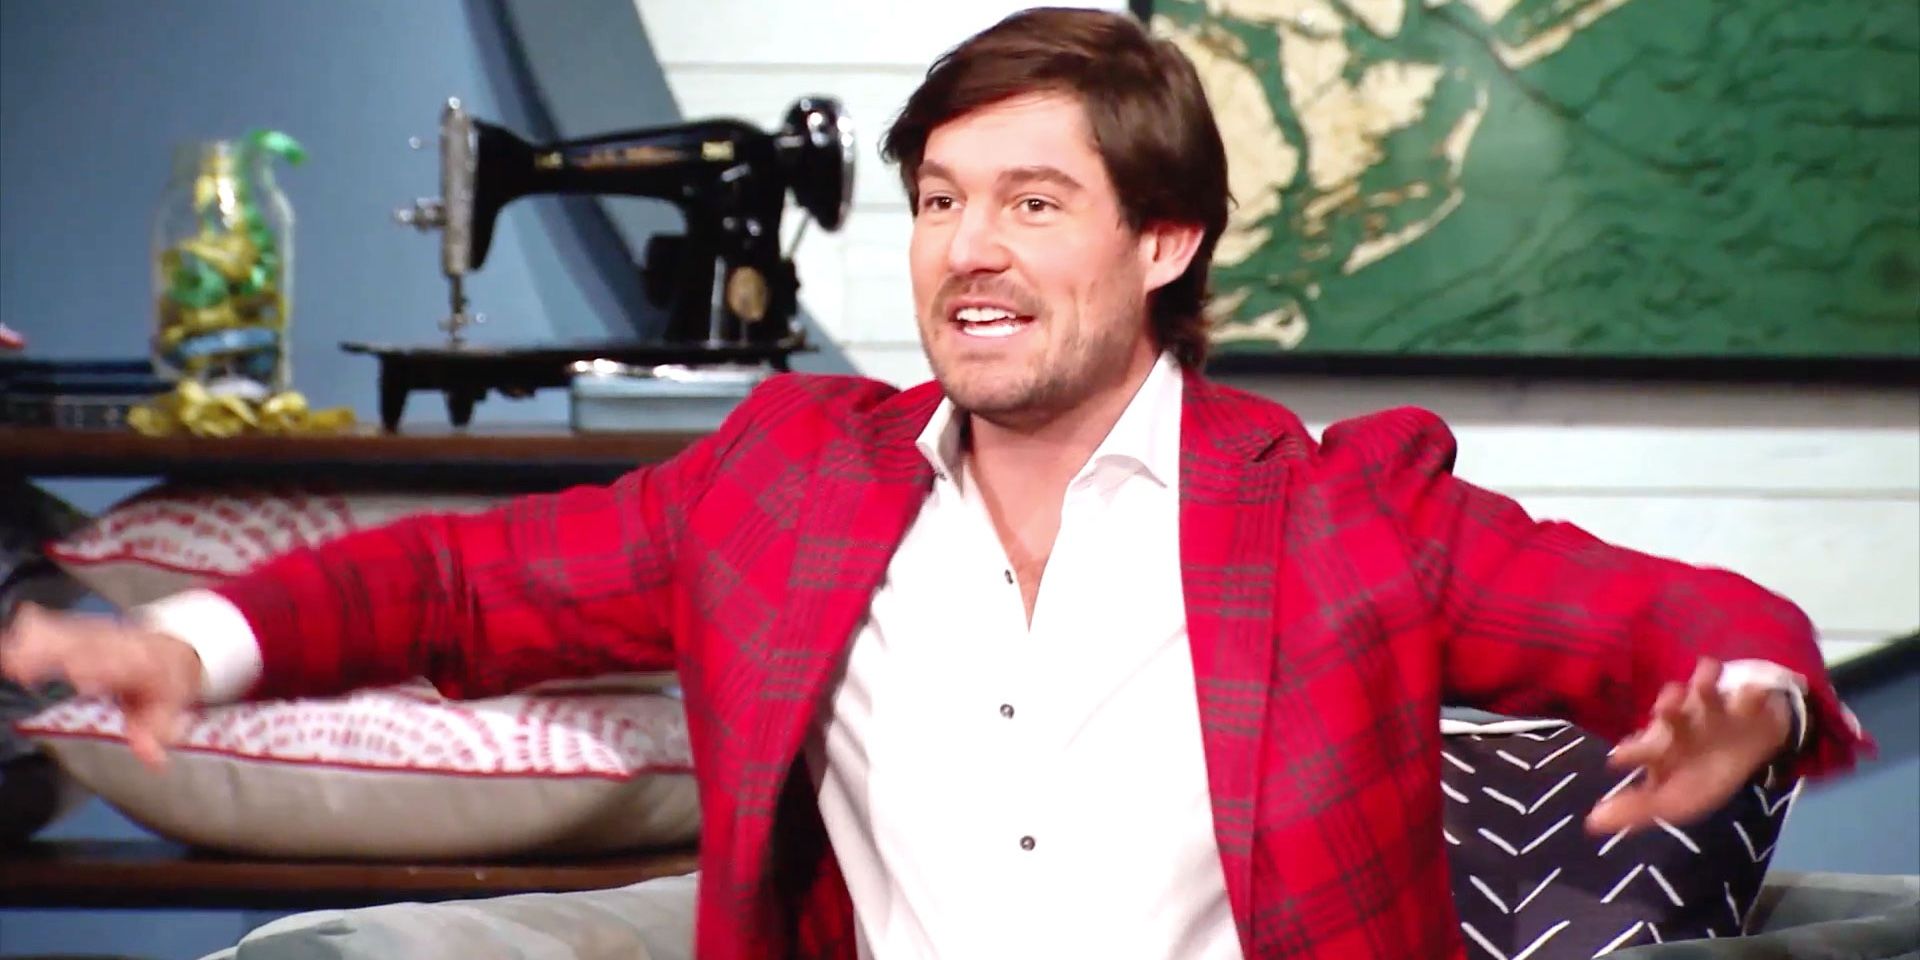 Craig smiling and wearing a red jacket on Southern Charm